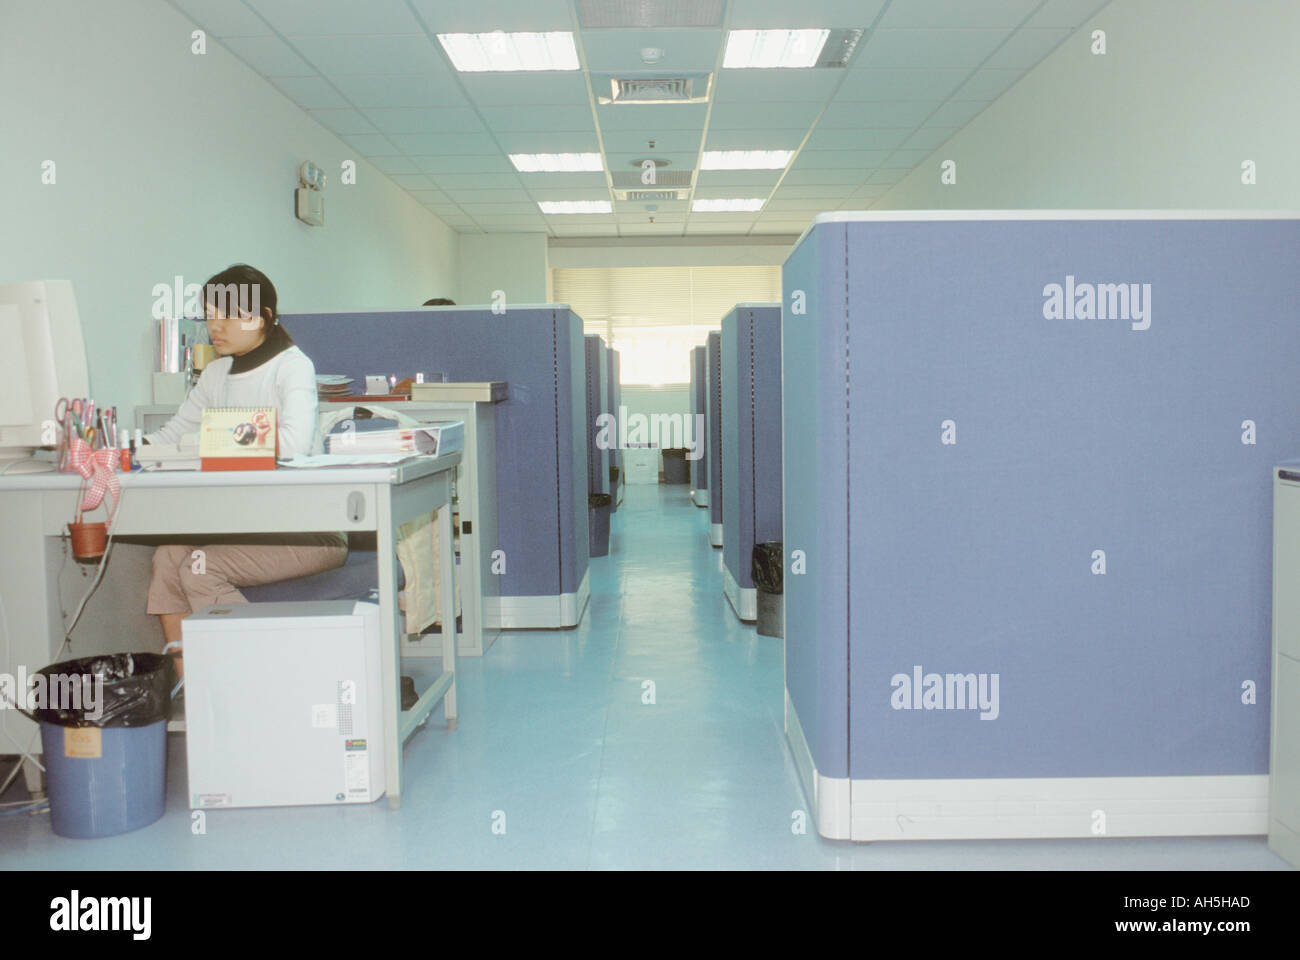 Clerk At Desk Office Cubicles In Hospital Taiwan China Stock Photo